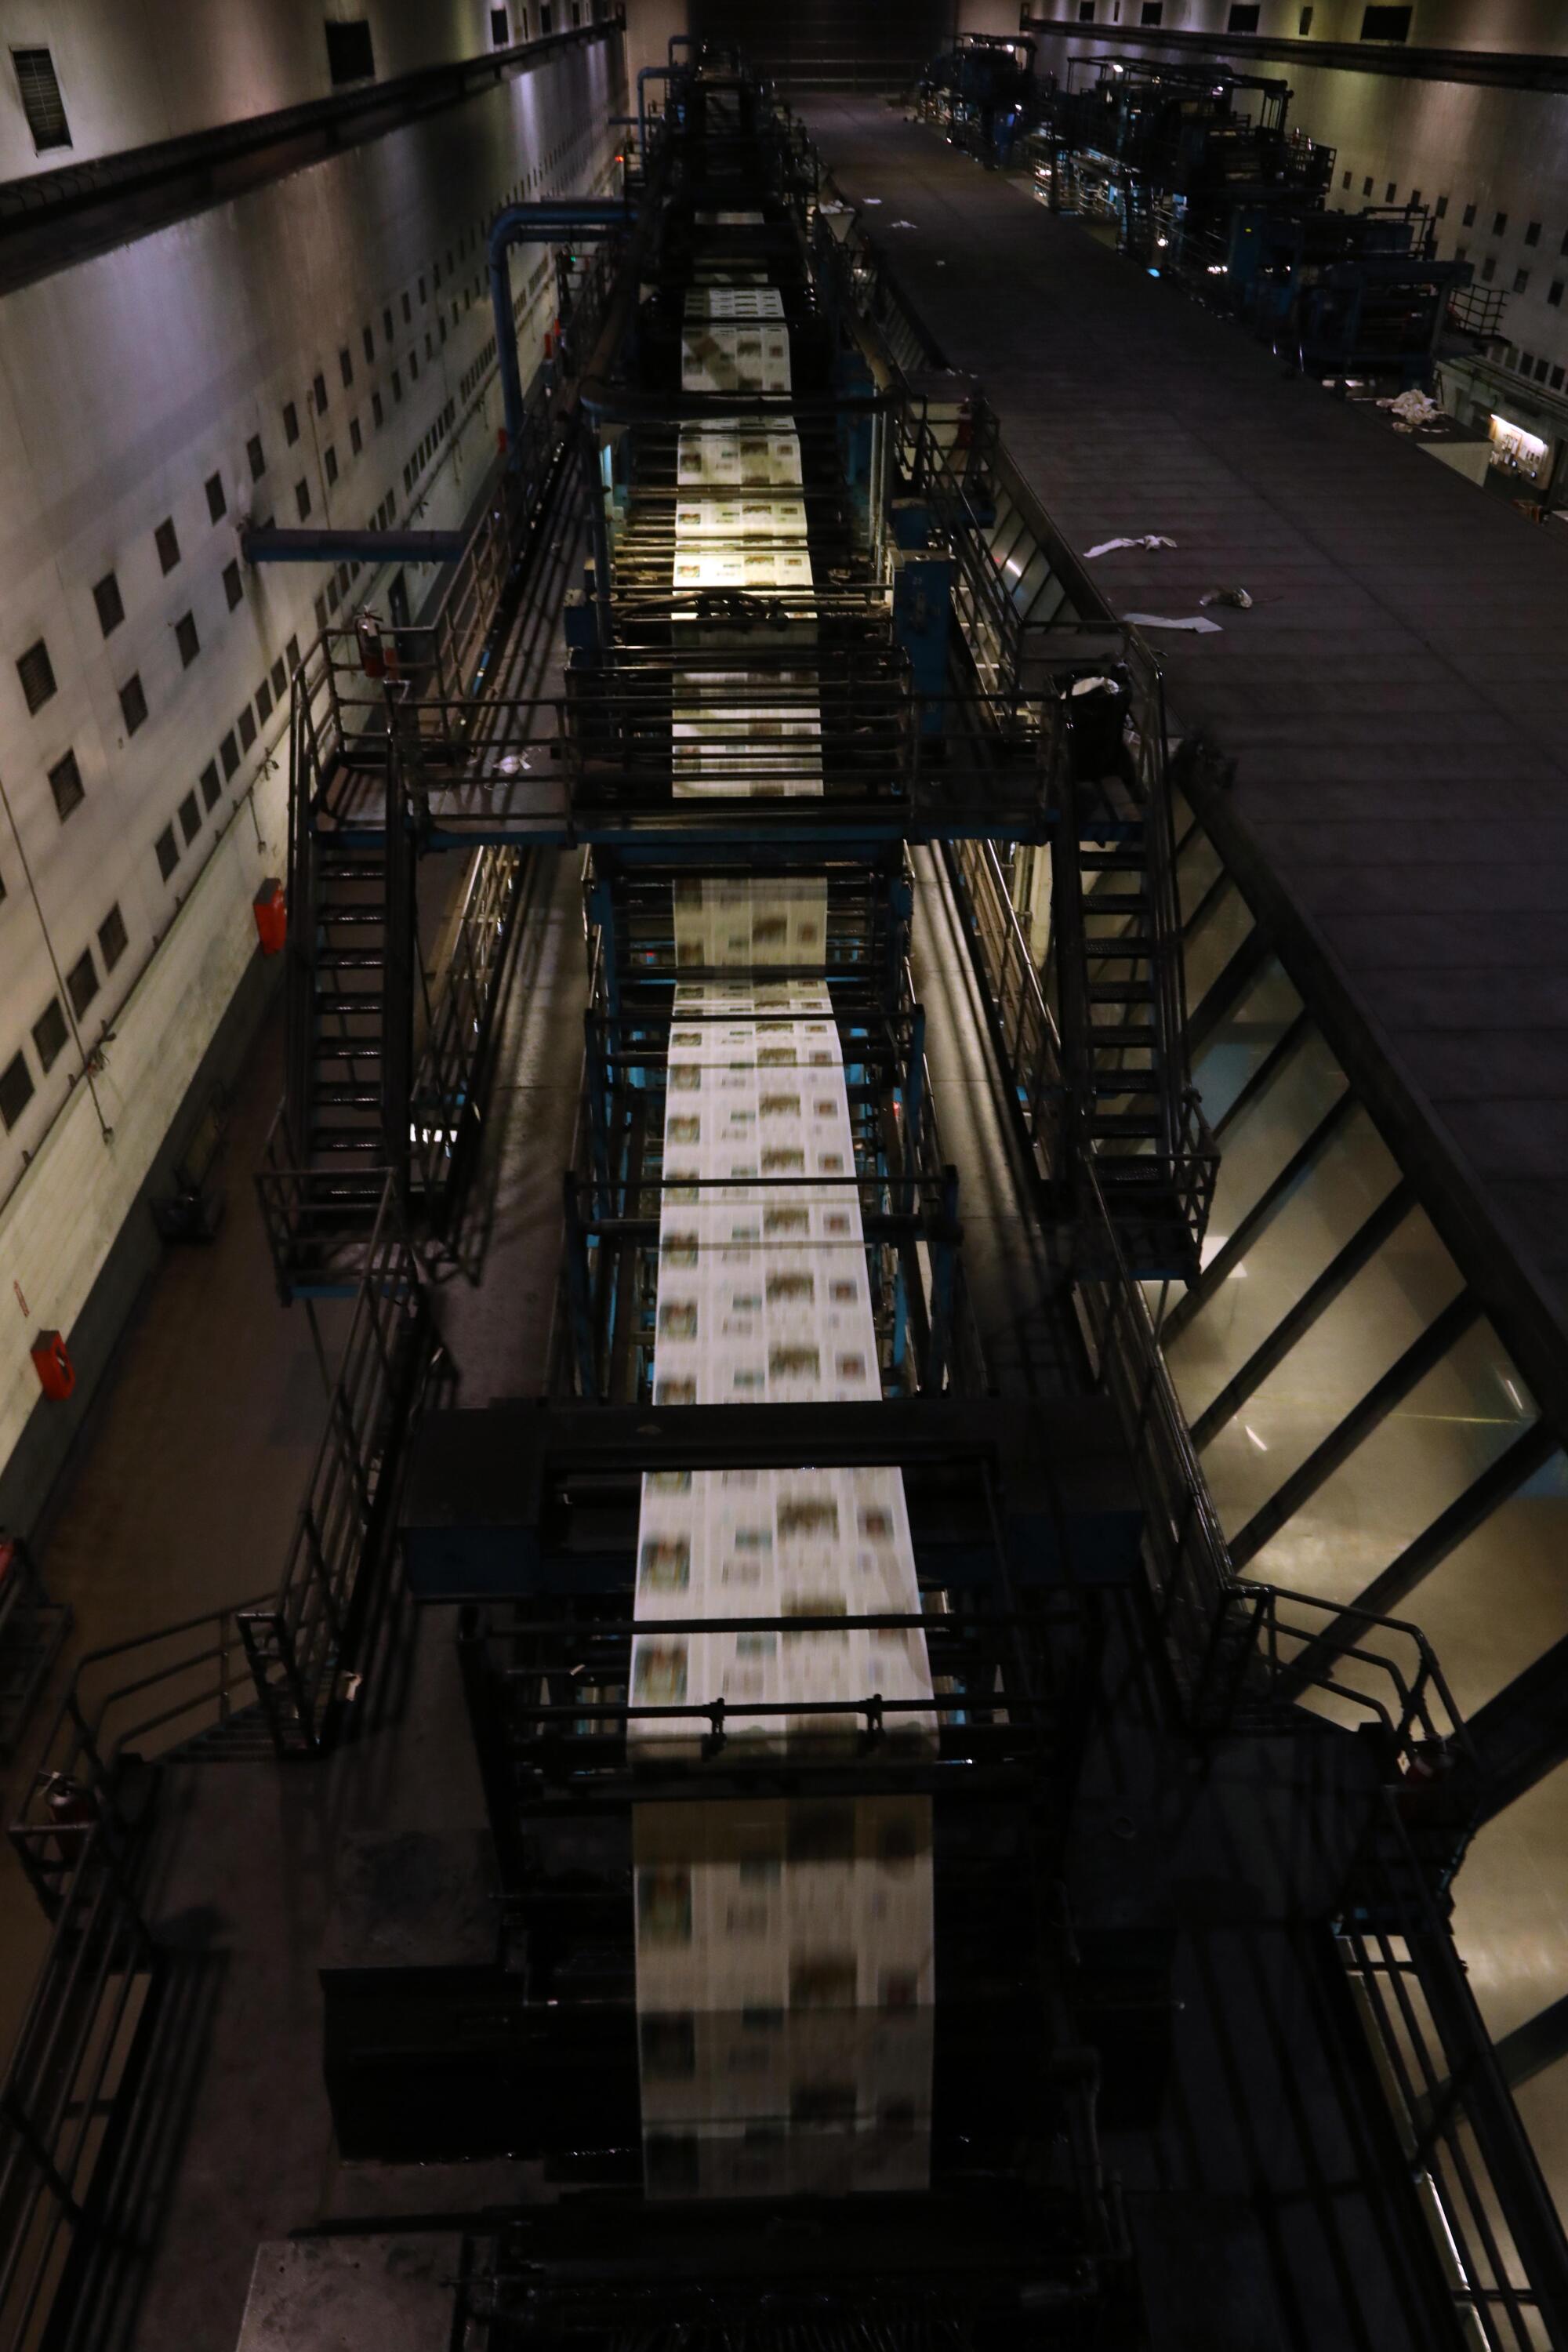 A view from the catwalk captures newspapers rolling off the presses